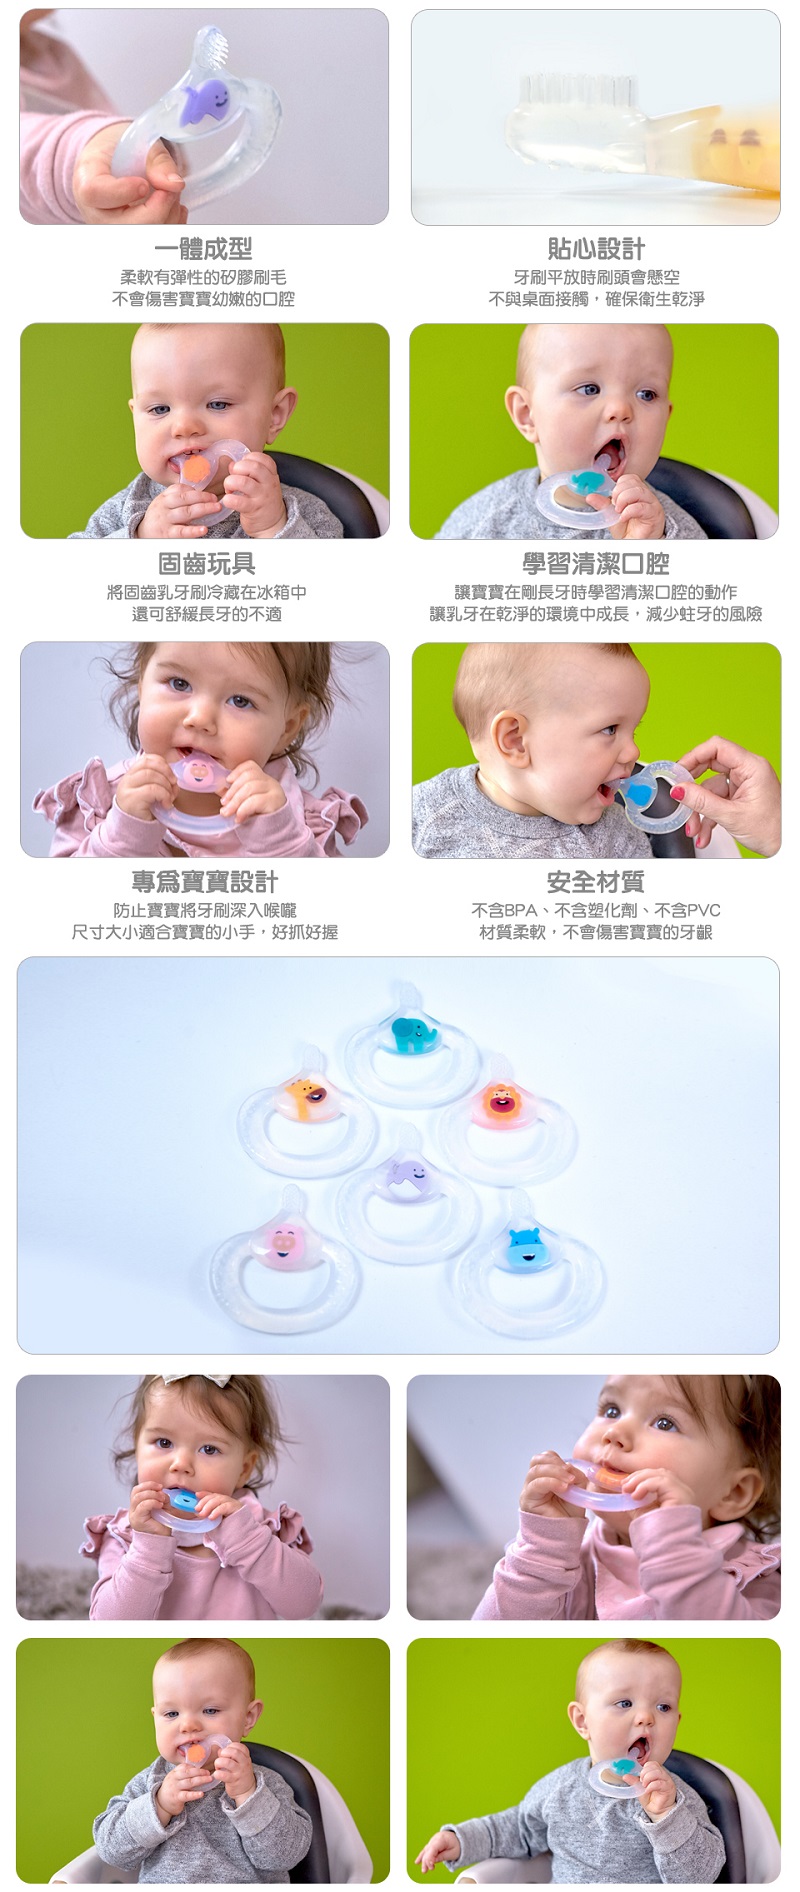 Marcus and Marcus Baby Teething Toothbrush动物乐园宝宝手握固齿牙刷